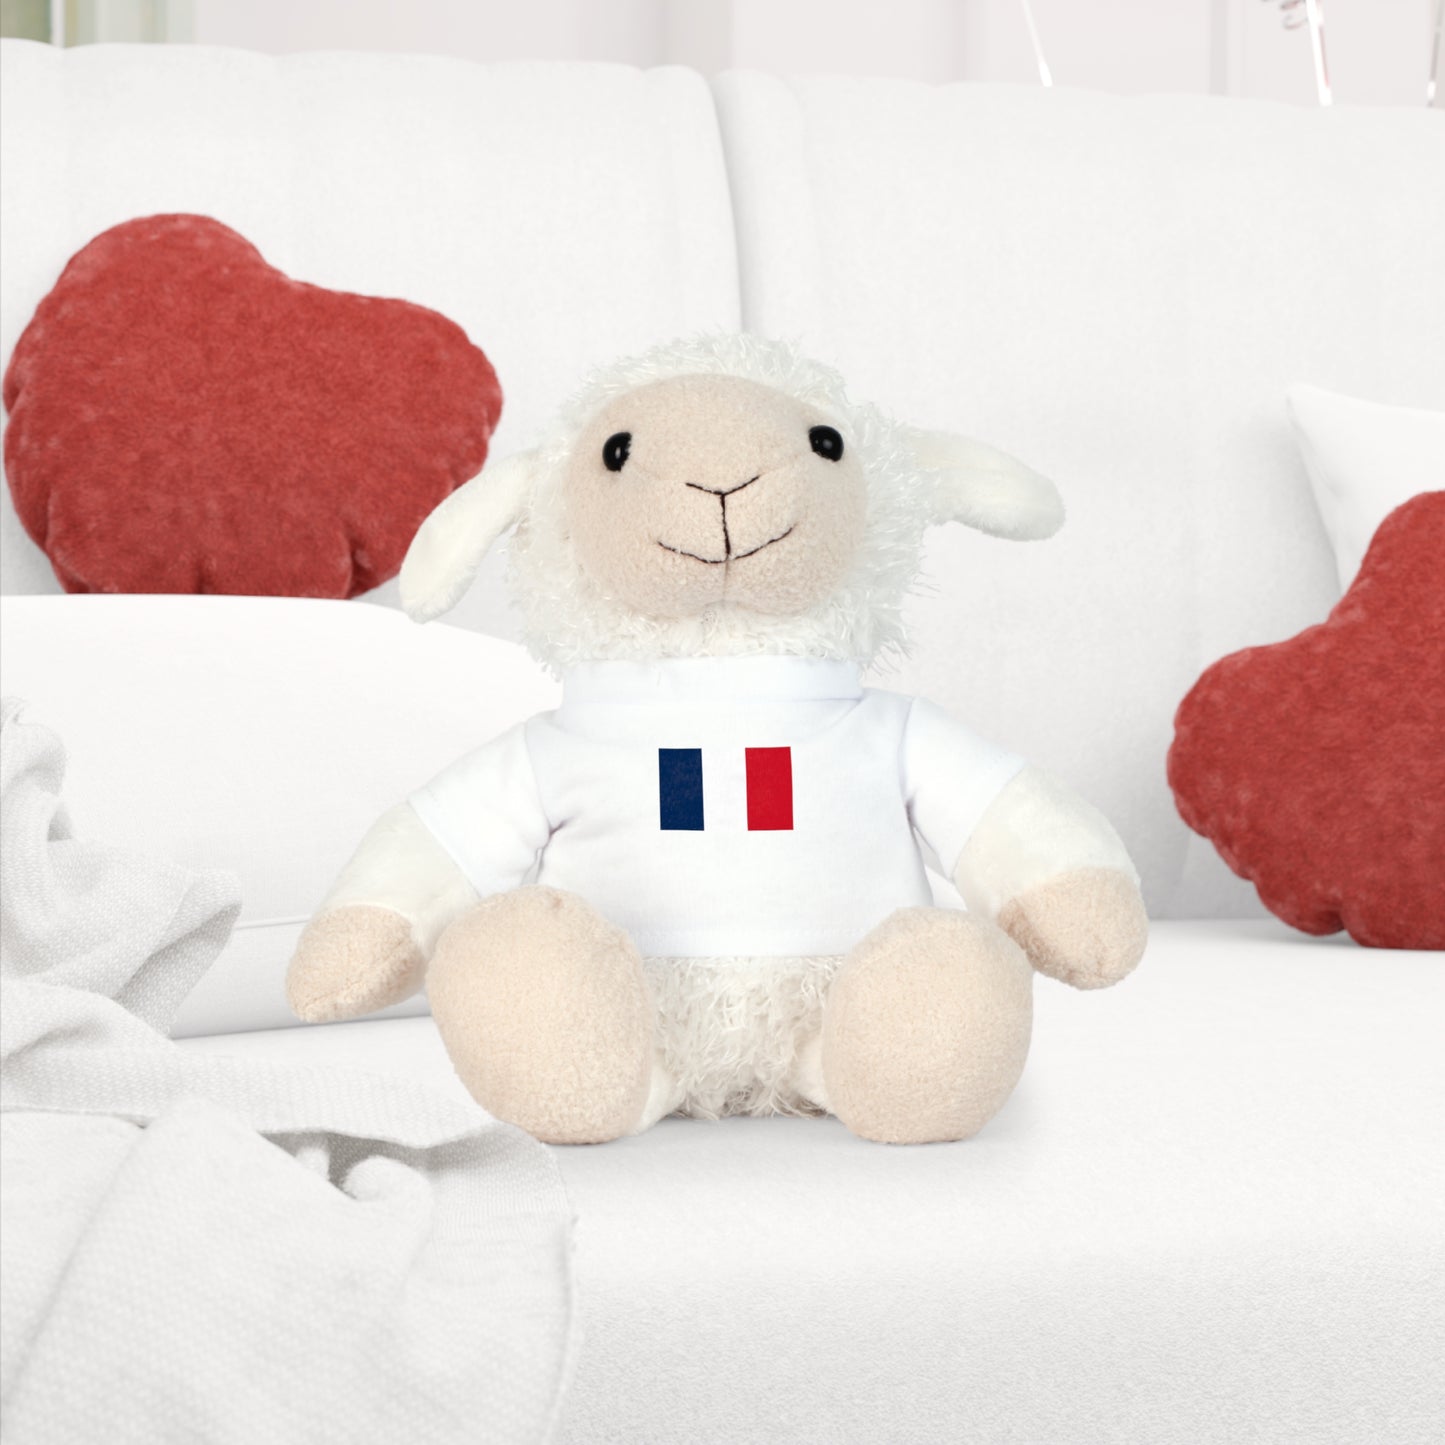 Plush Toy with French Flag Shirt